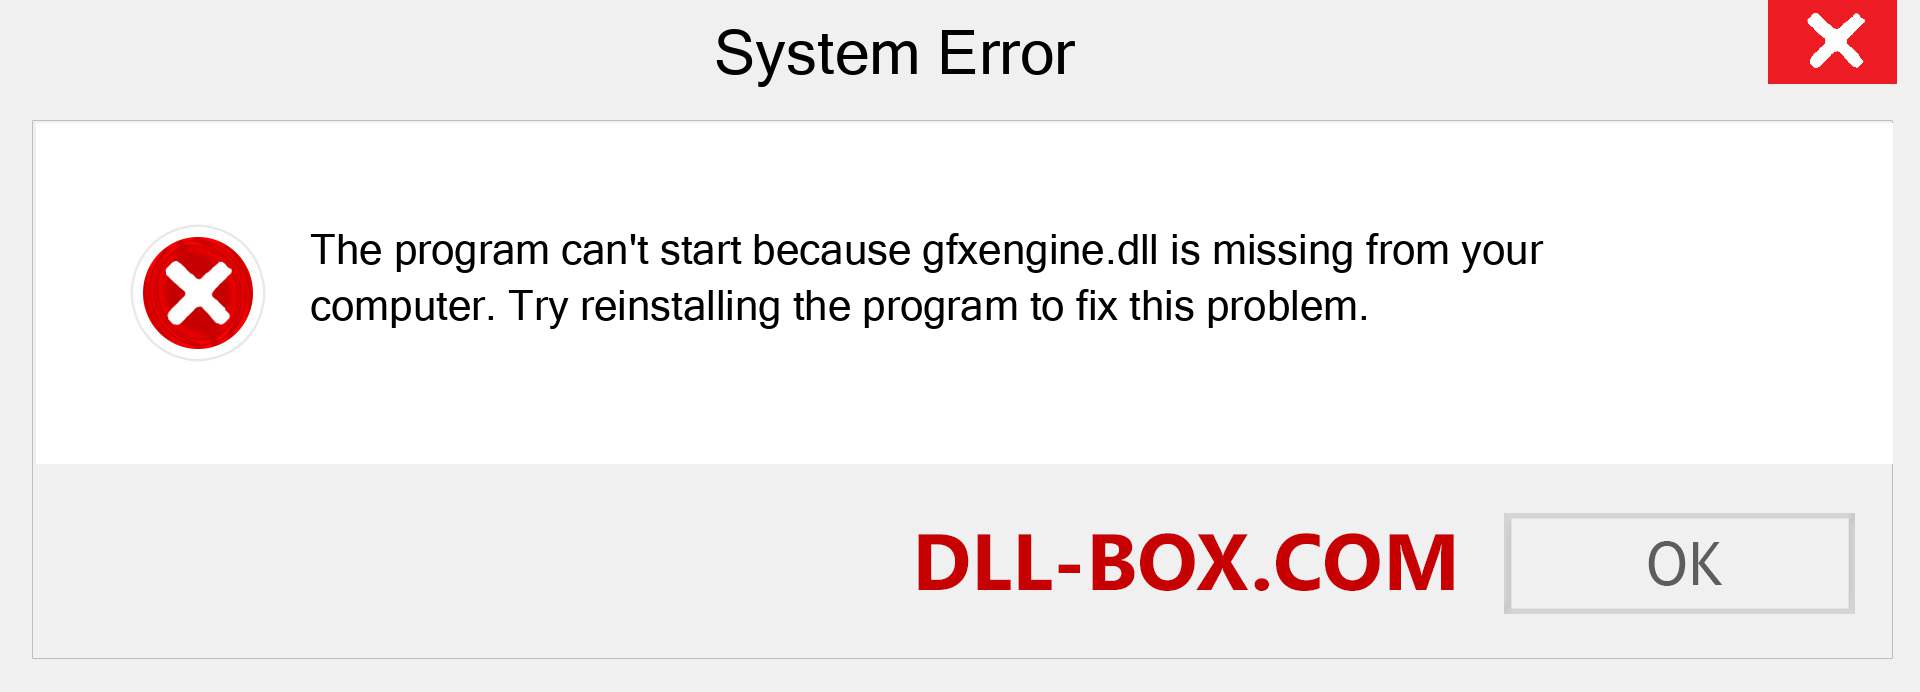  gfxengine.dll file is missing?. Download for Windows 7, 8, 10 - Fix  gfxengine dll Missing Error on Windows, photos, images